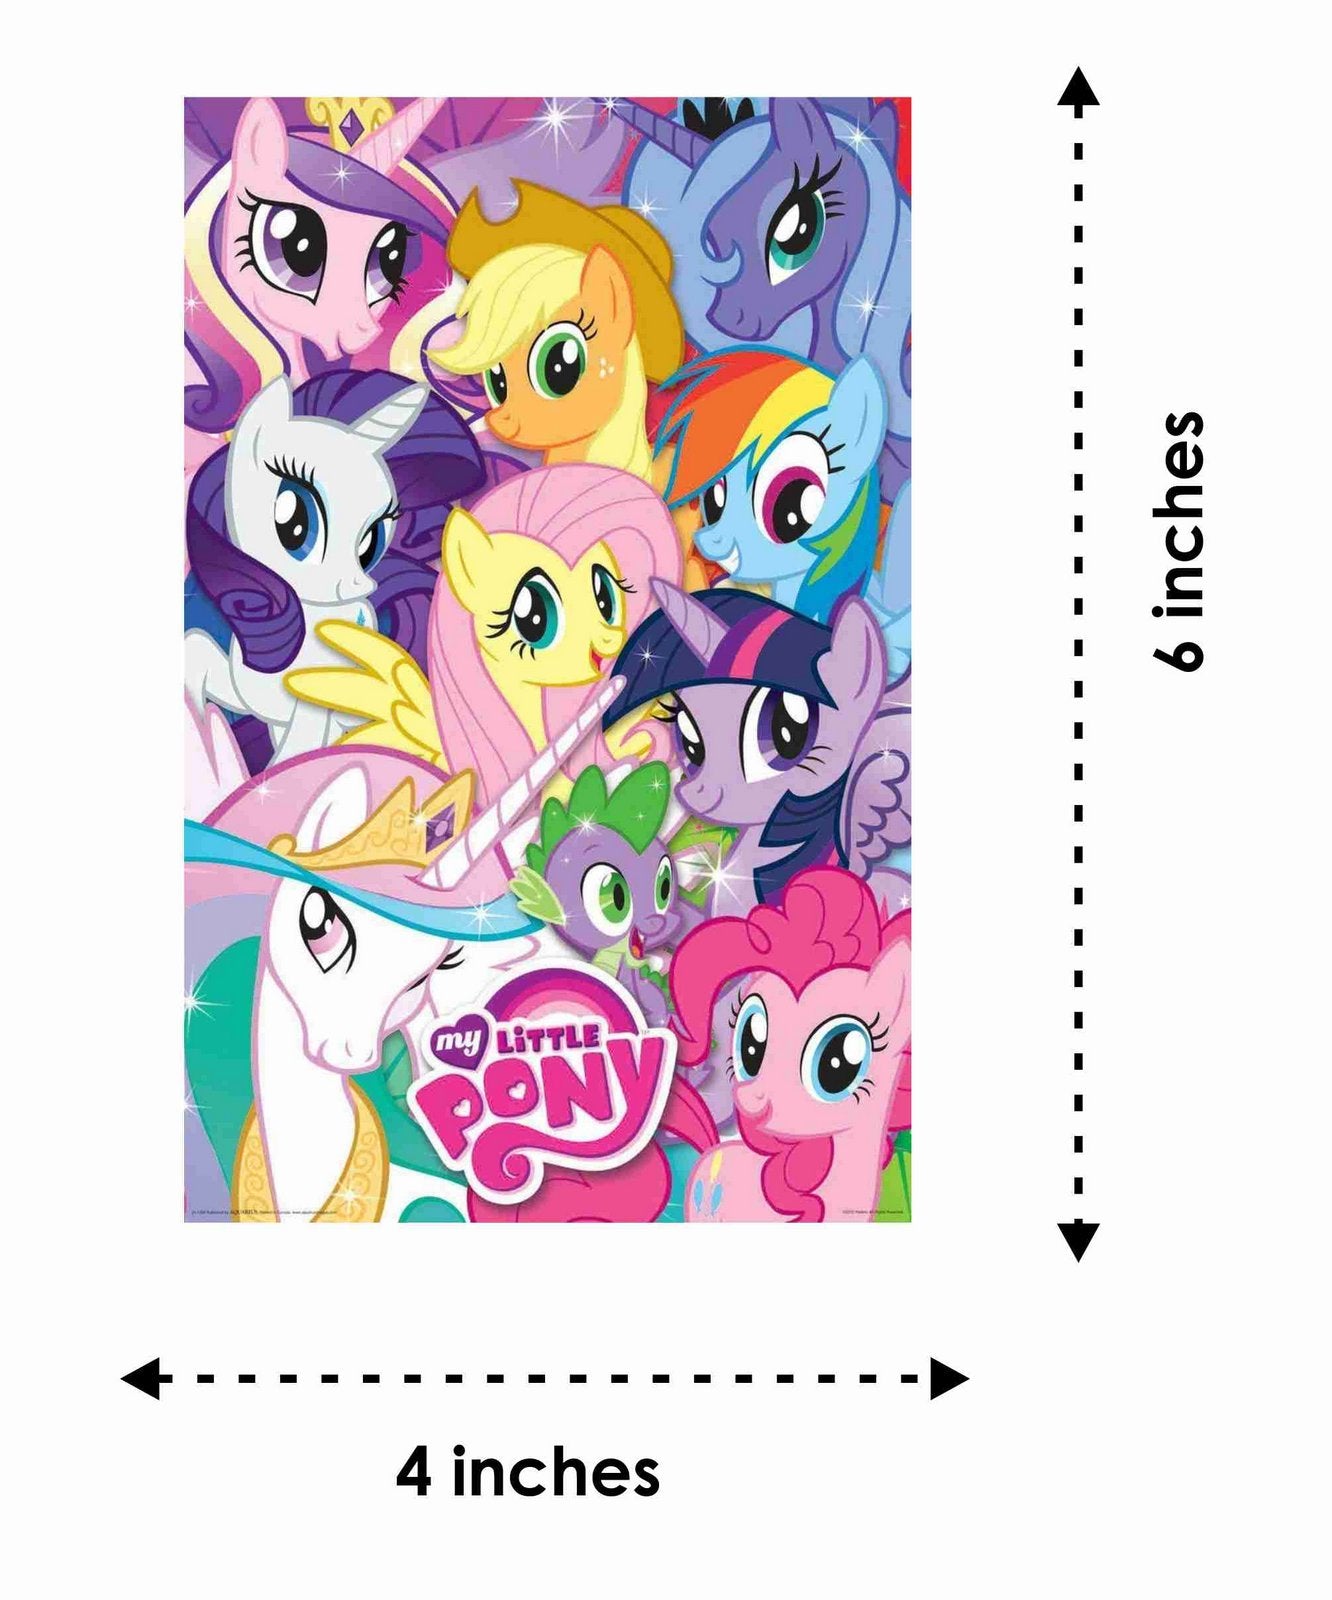 Little Pony Theme Children's Birthday Party Invitations Cards with Envelopes - Kids Birthday Party Invitations for Boys or Girls,- Invitation Cards (Pack of 10)